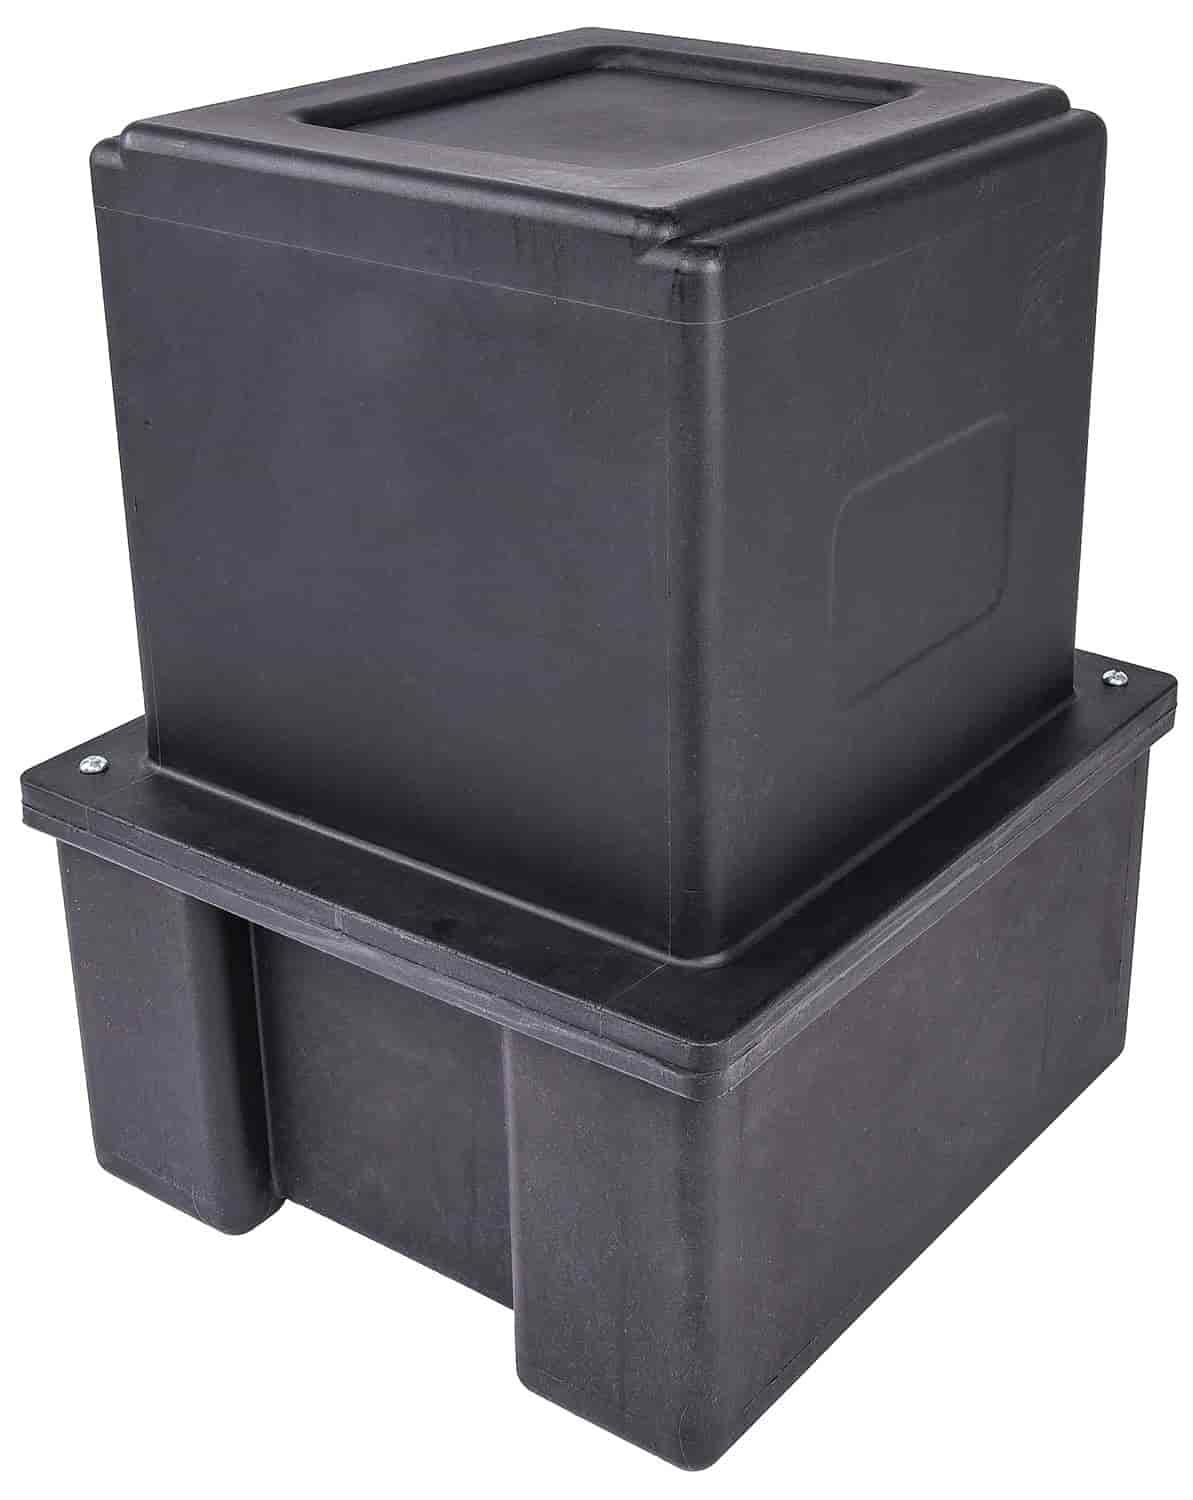 9 in. Ford Storage Box [18 1/2 in. H x 14 1/2 in. W x 13 1/2 in. D]